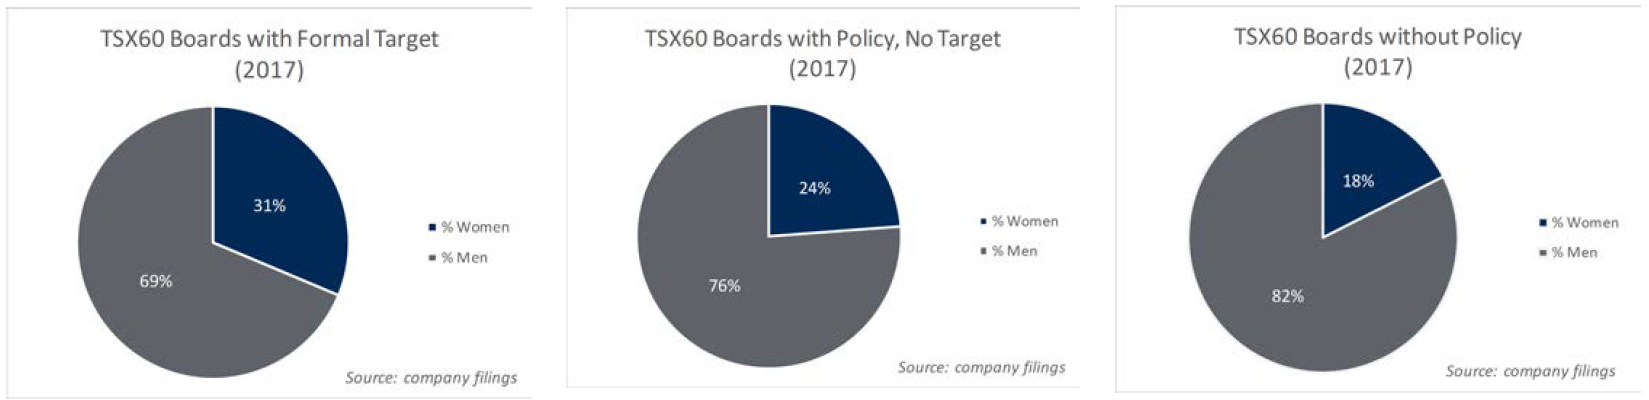 TSX60 Boards with Formal Target, with Policy, no Target and without Policy (2017)